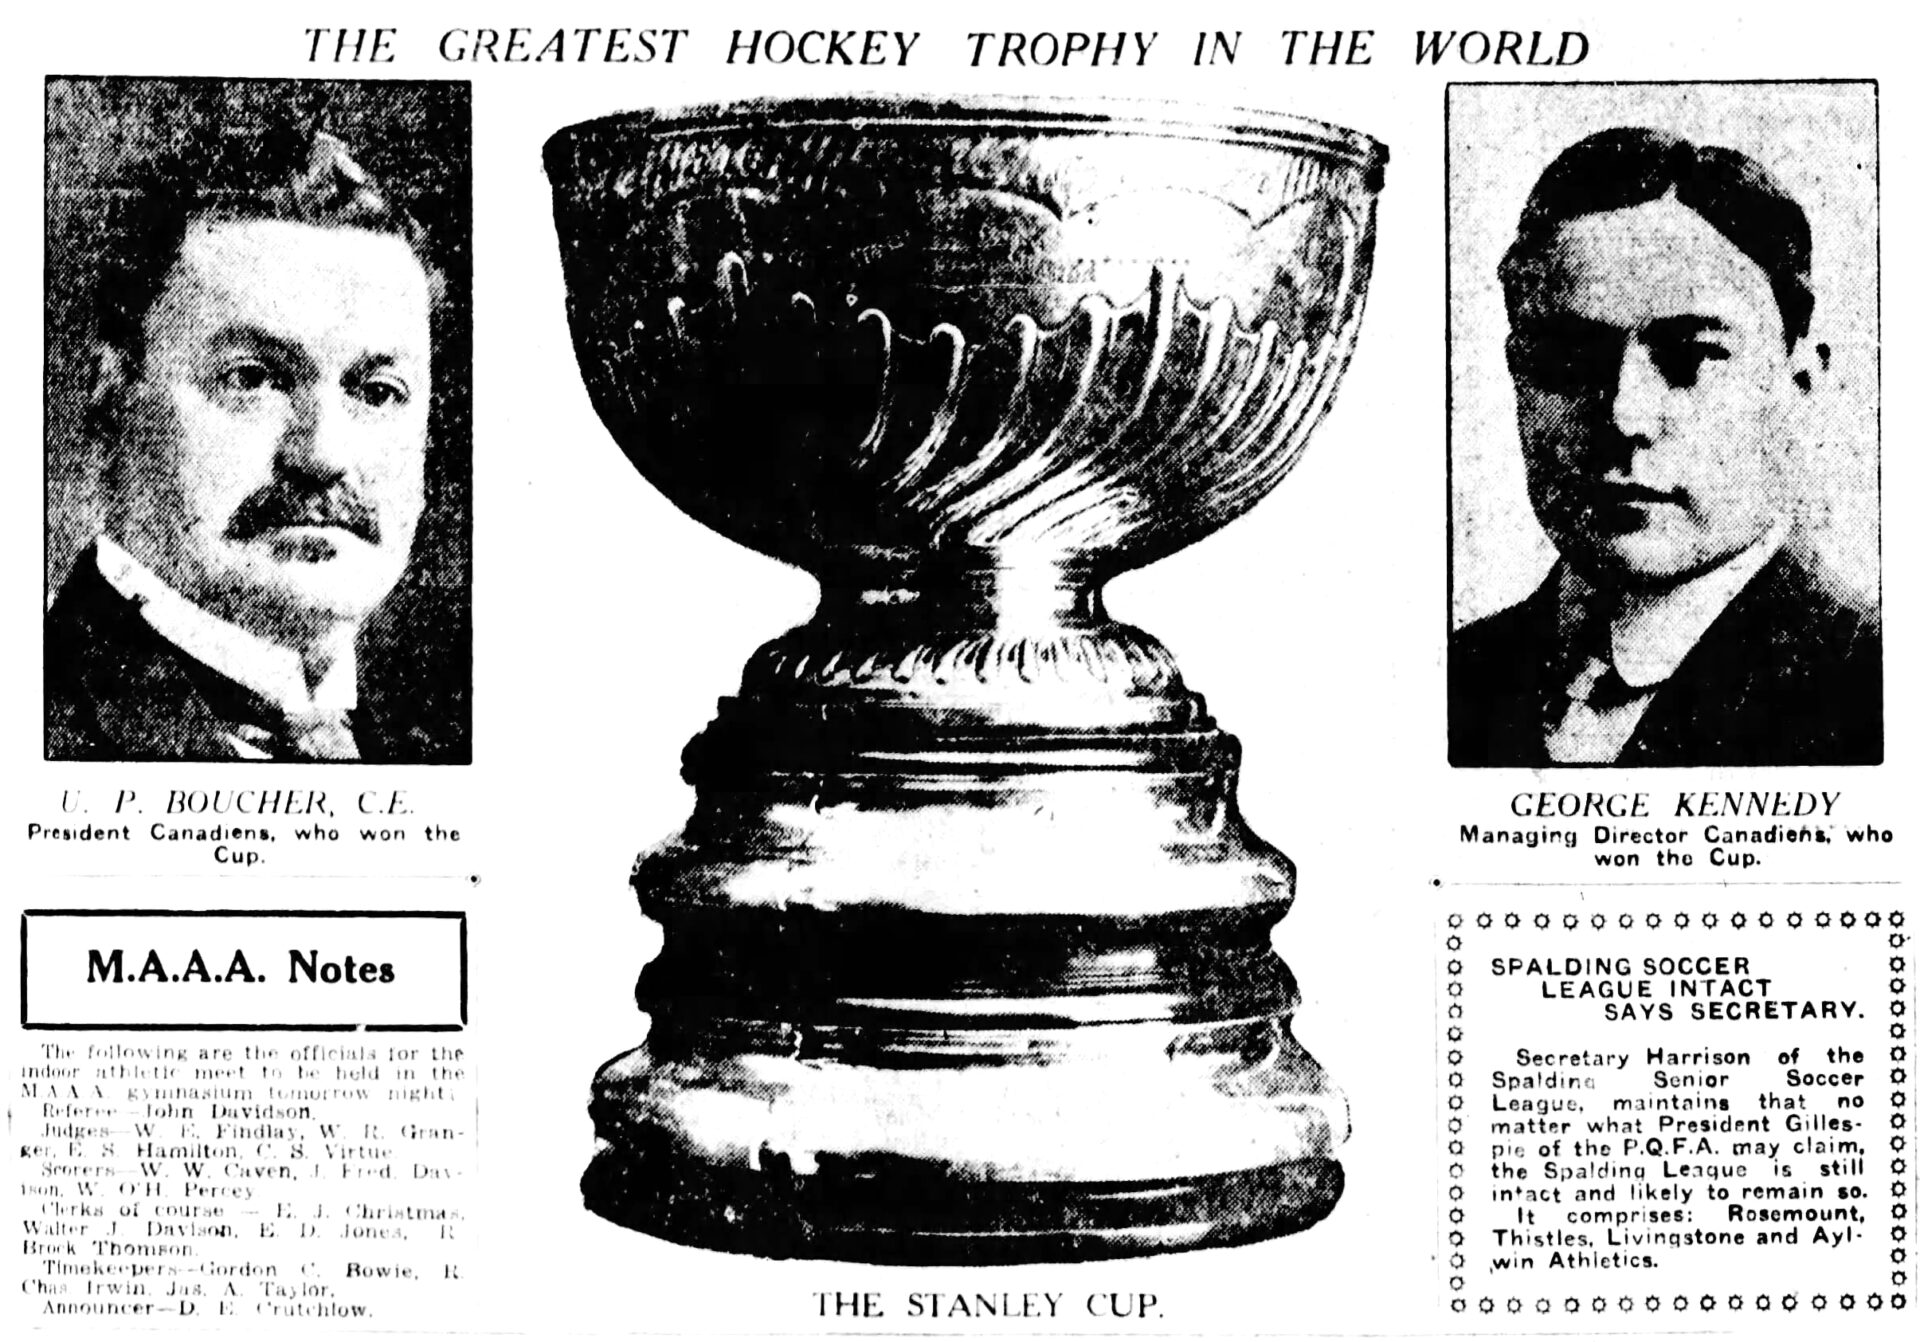 This Day In Hockey History-March 30, 1916-Montreal Canadiens Win Their First Stanley Cup